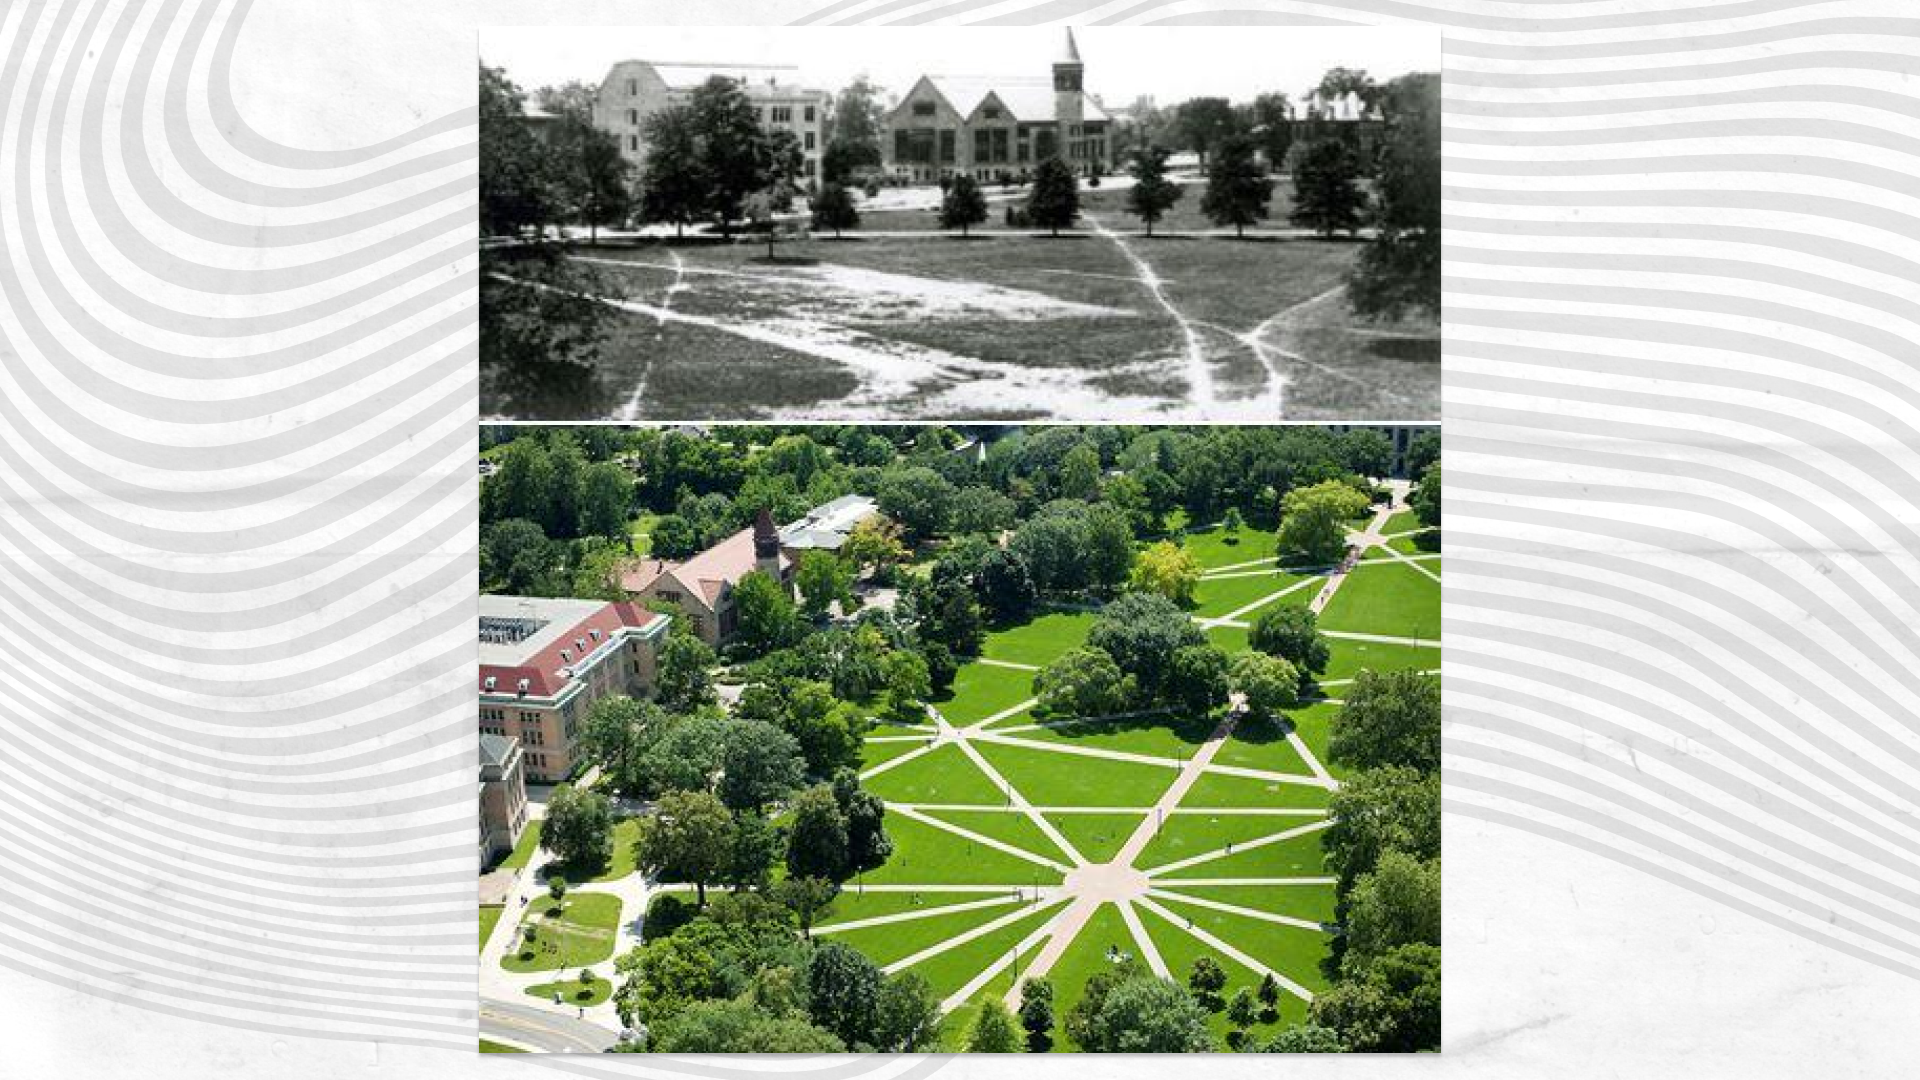 Ohio State University let students reveal where they wanted paths before paving them.